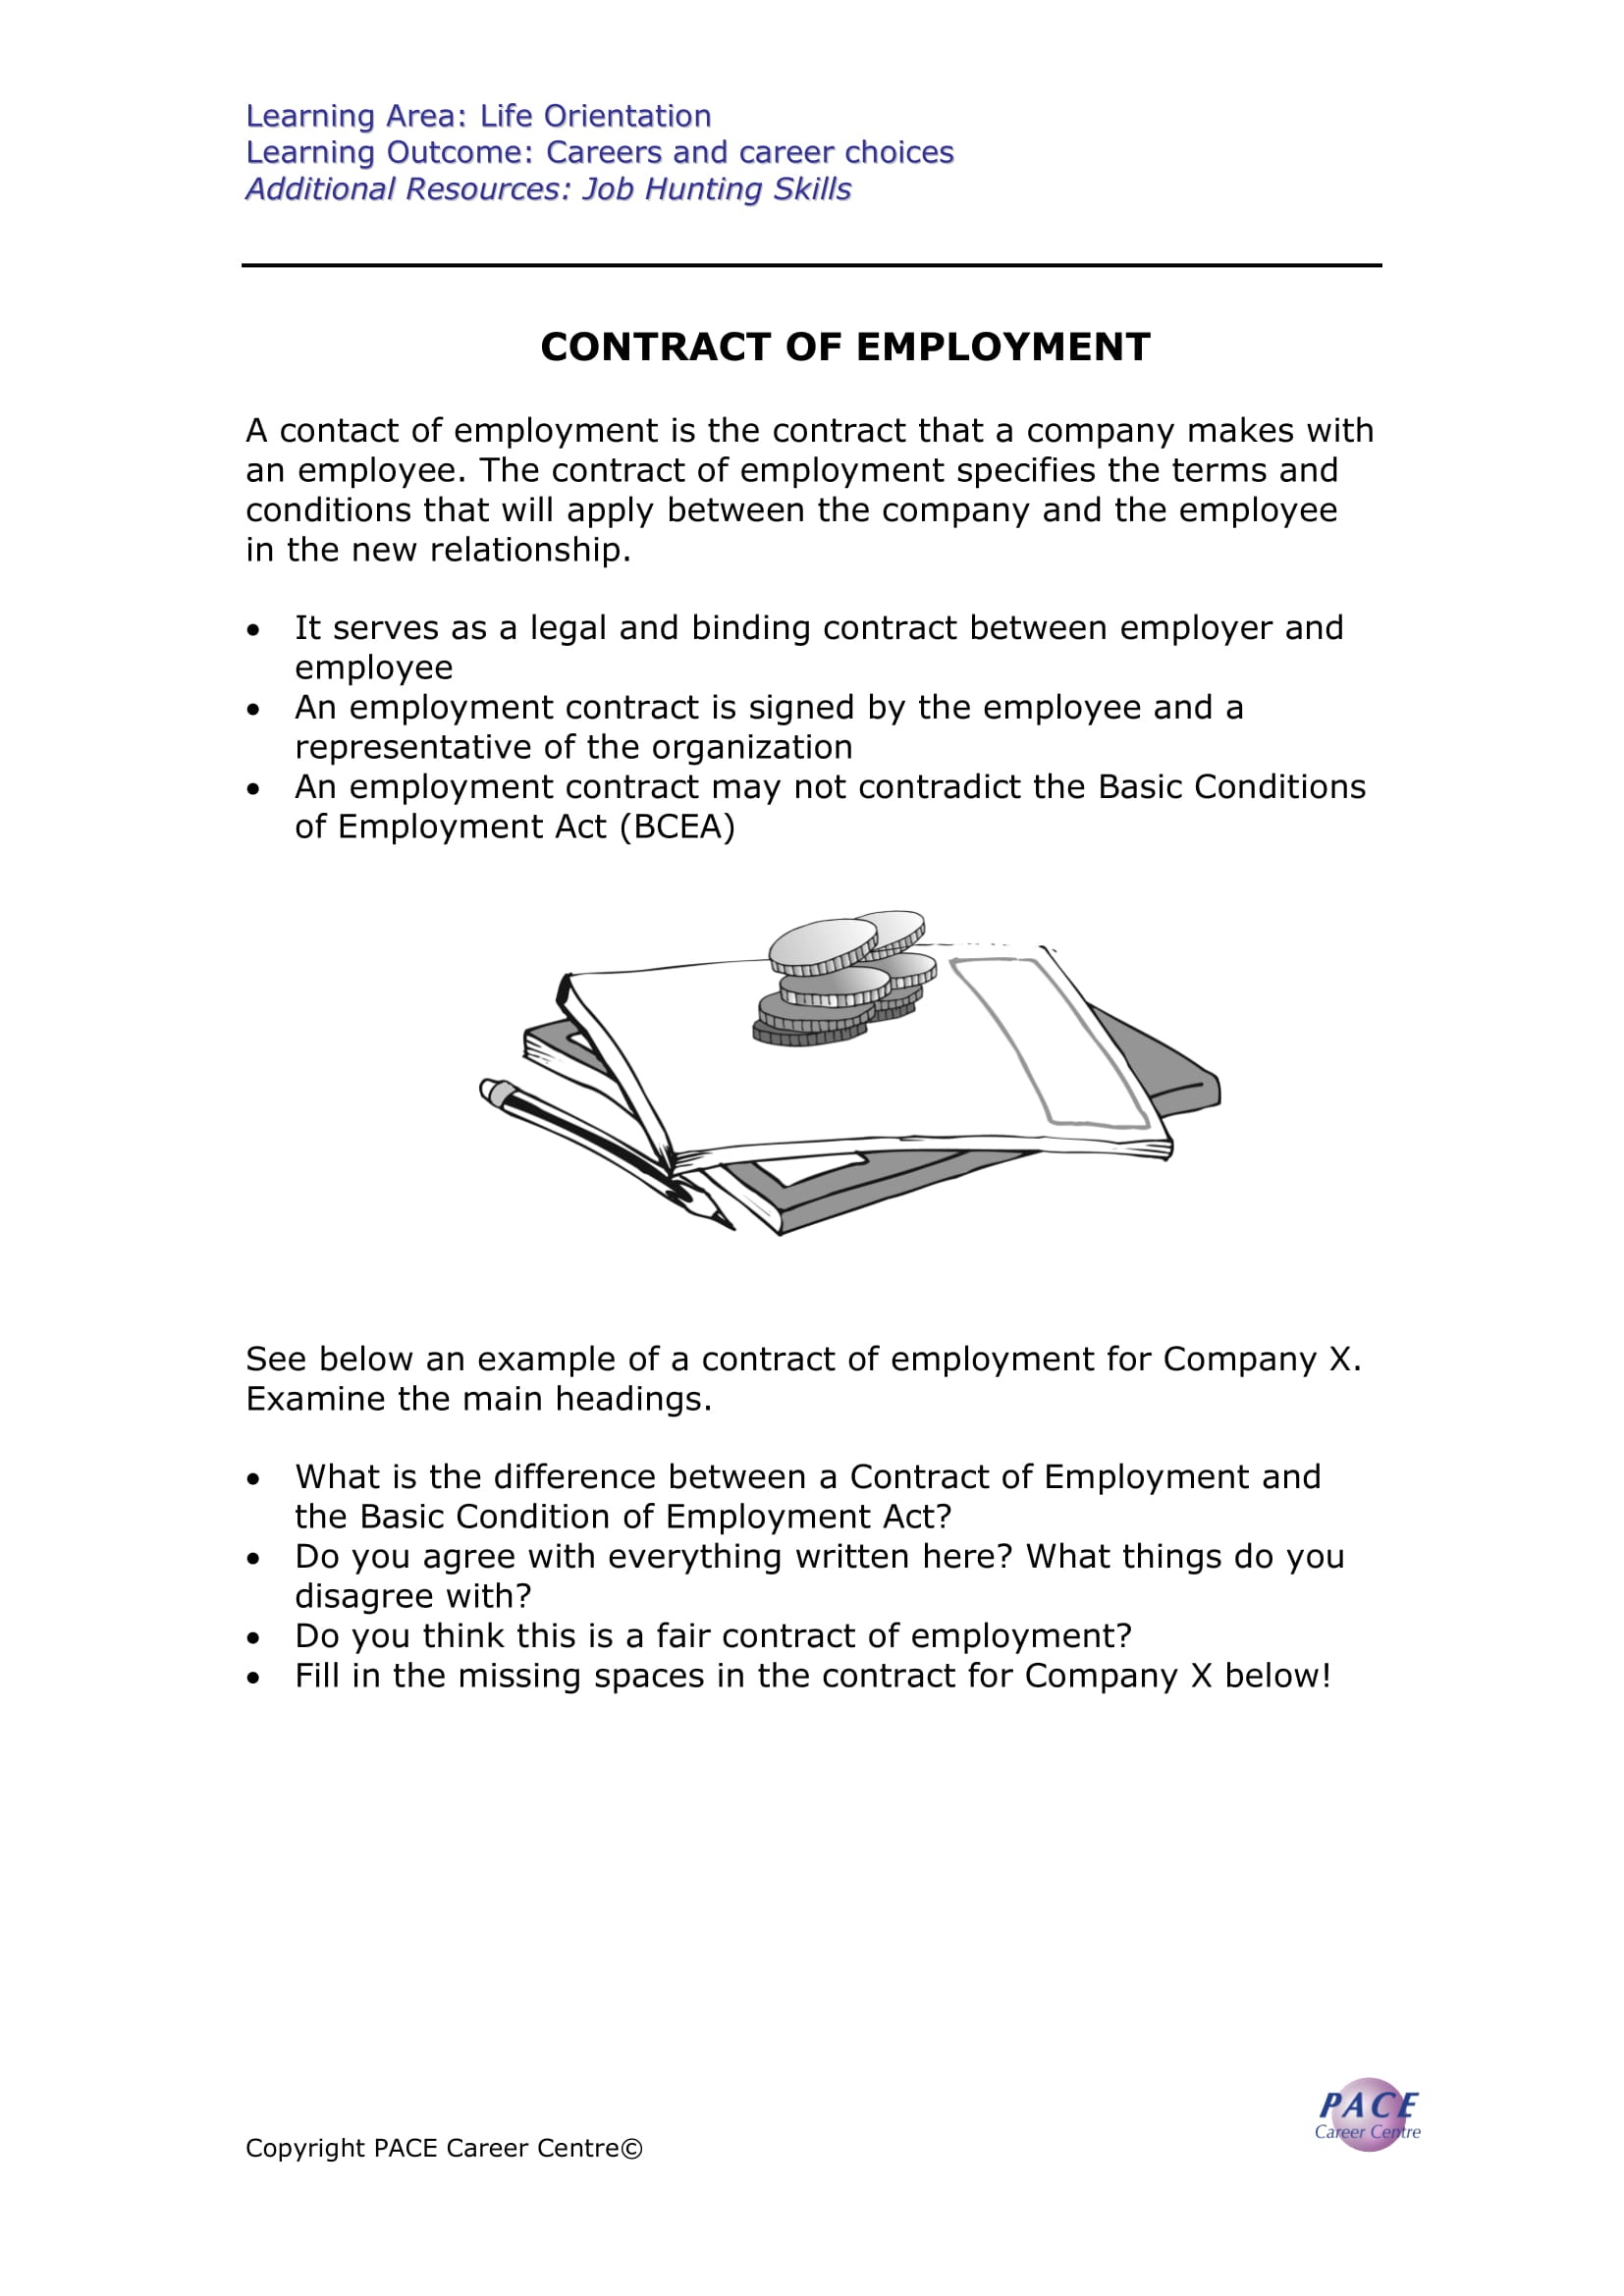 contract of employment example